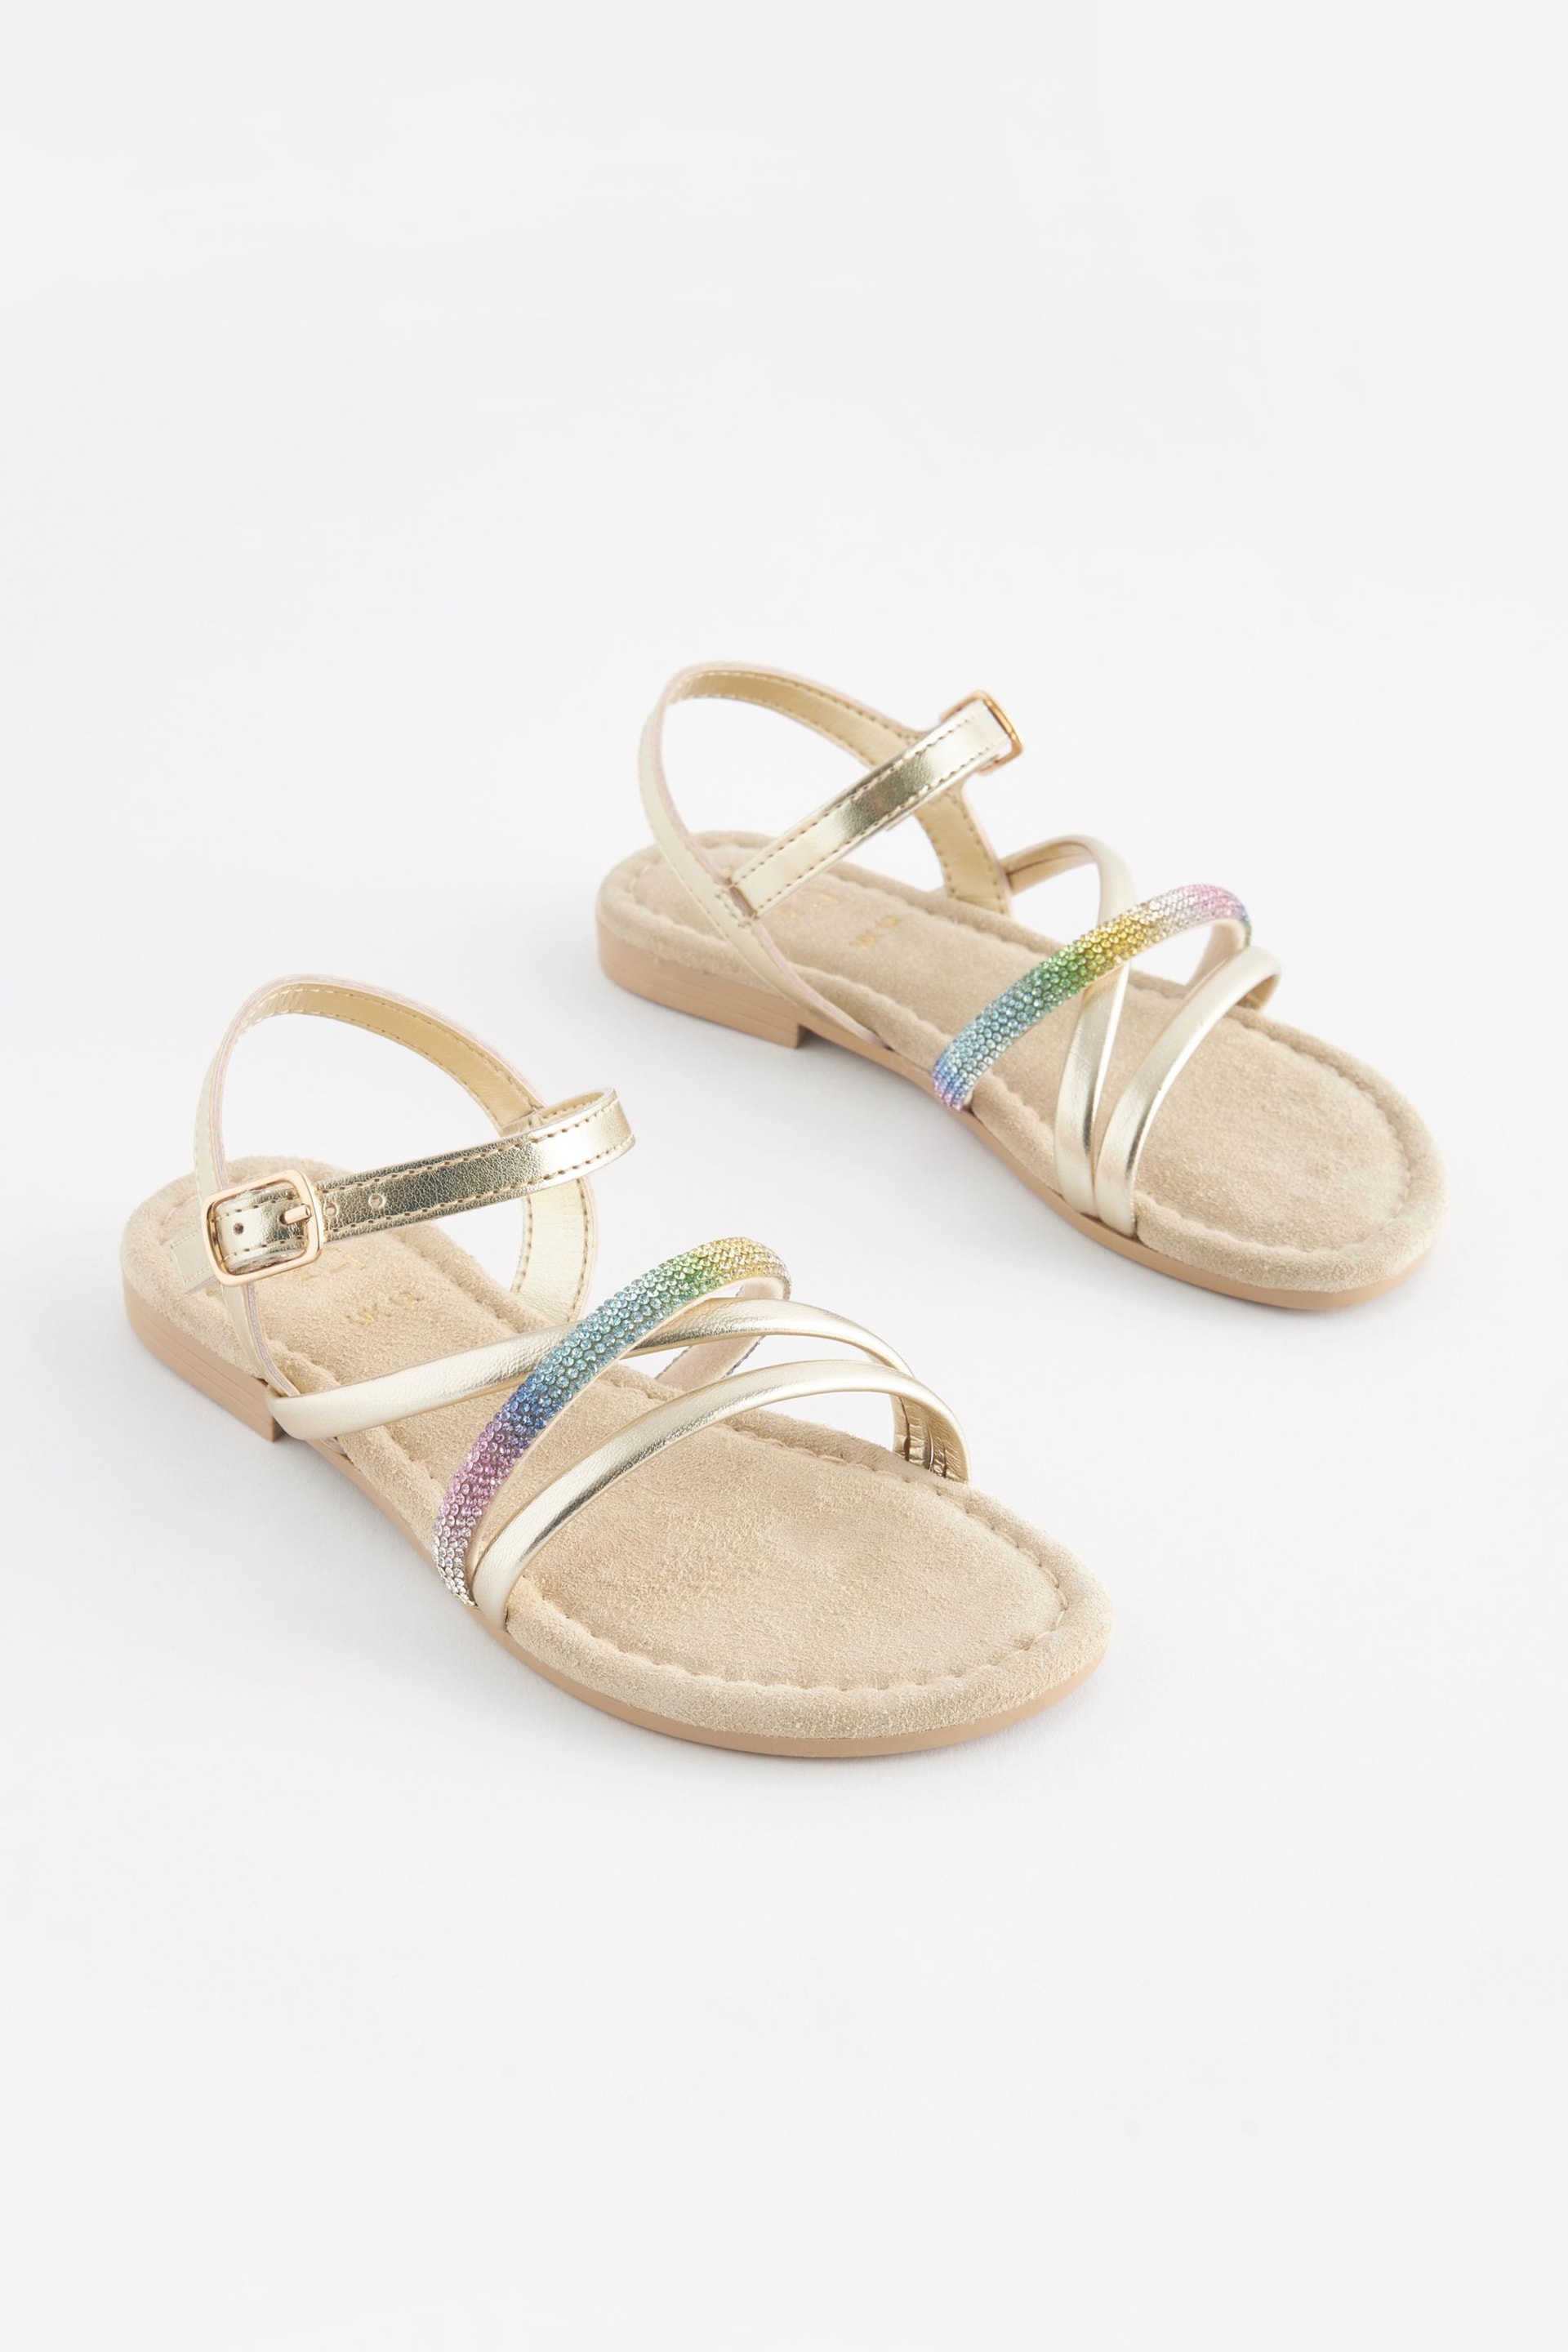 Gold Rainbow Strappy Occasion Sandals - Image 1 of 5